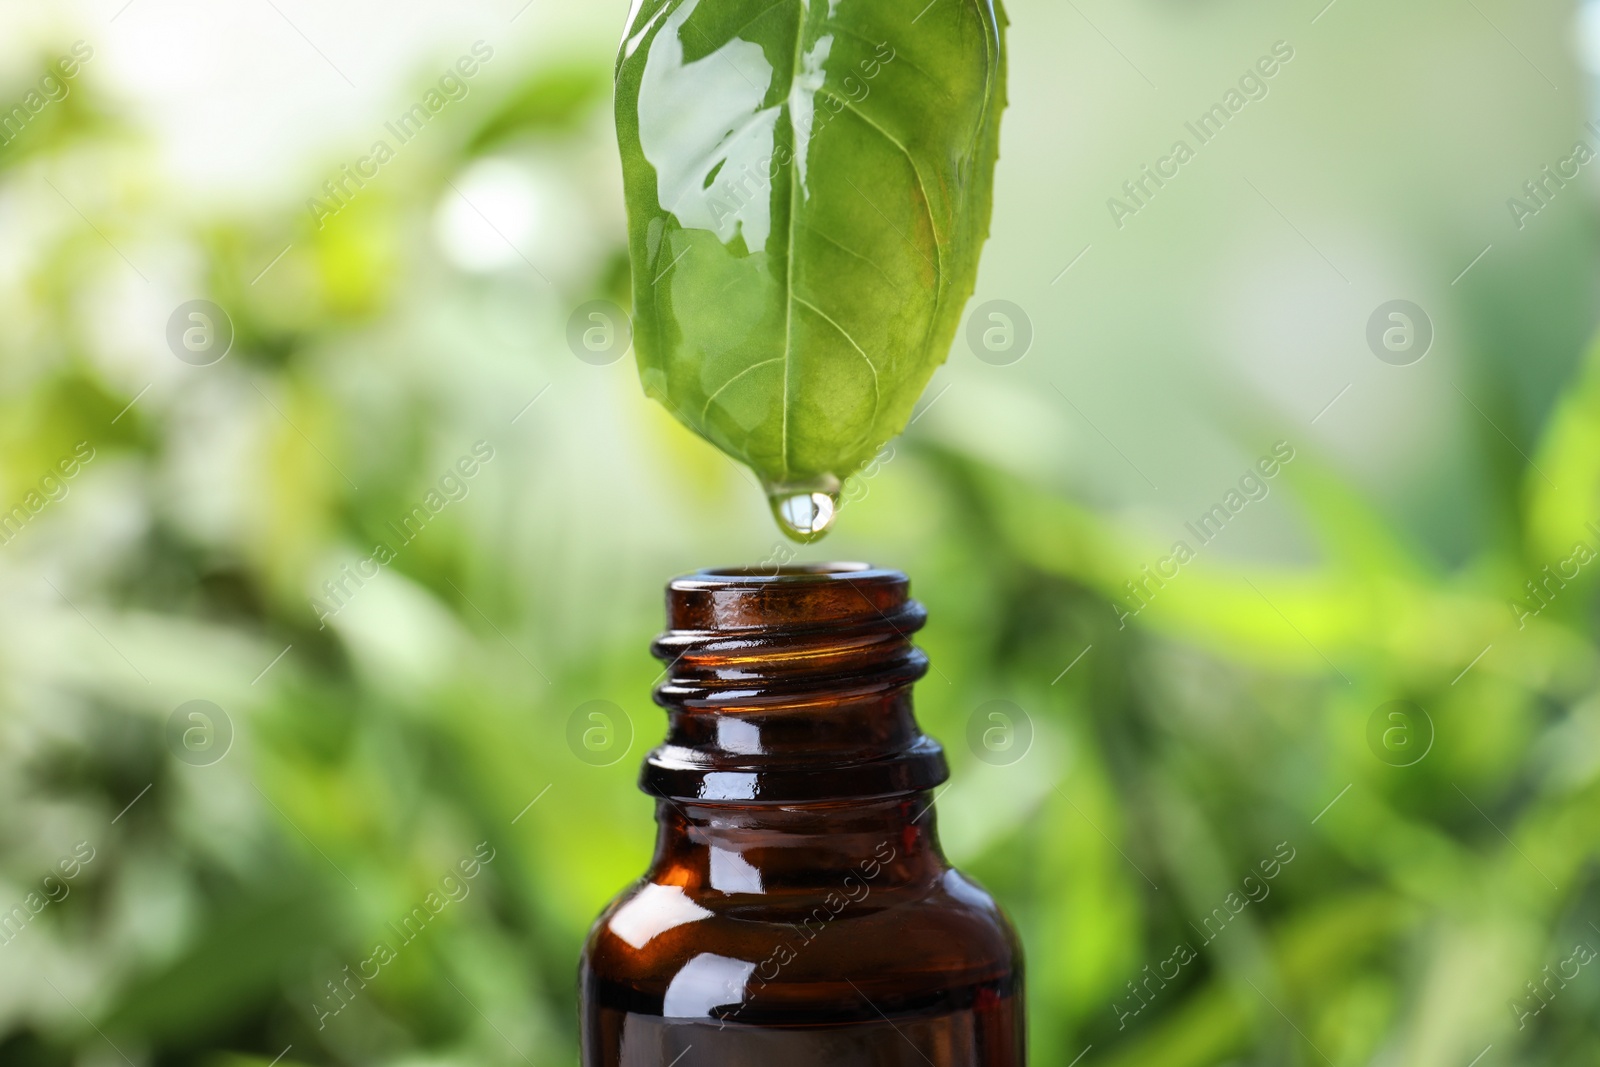 Photo of Essential oil dripping from basil leaf into glass bottle on blurred background, closeup